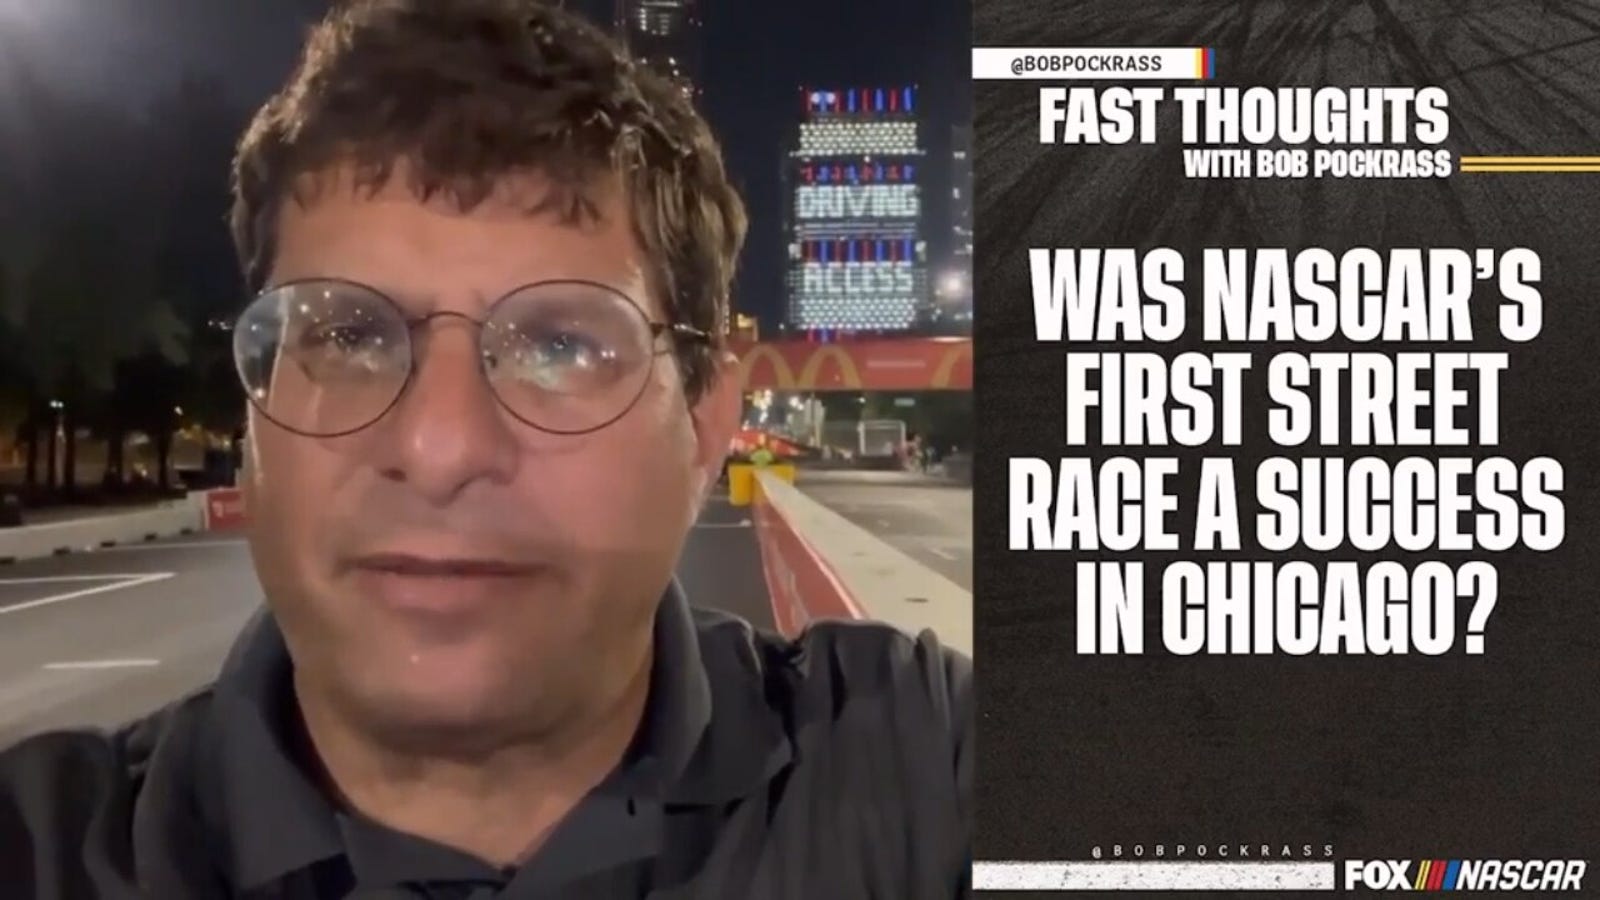 Fast Thoughts with Bob Pockrass